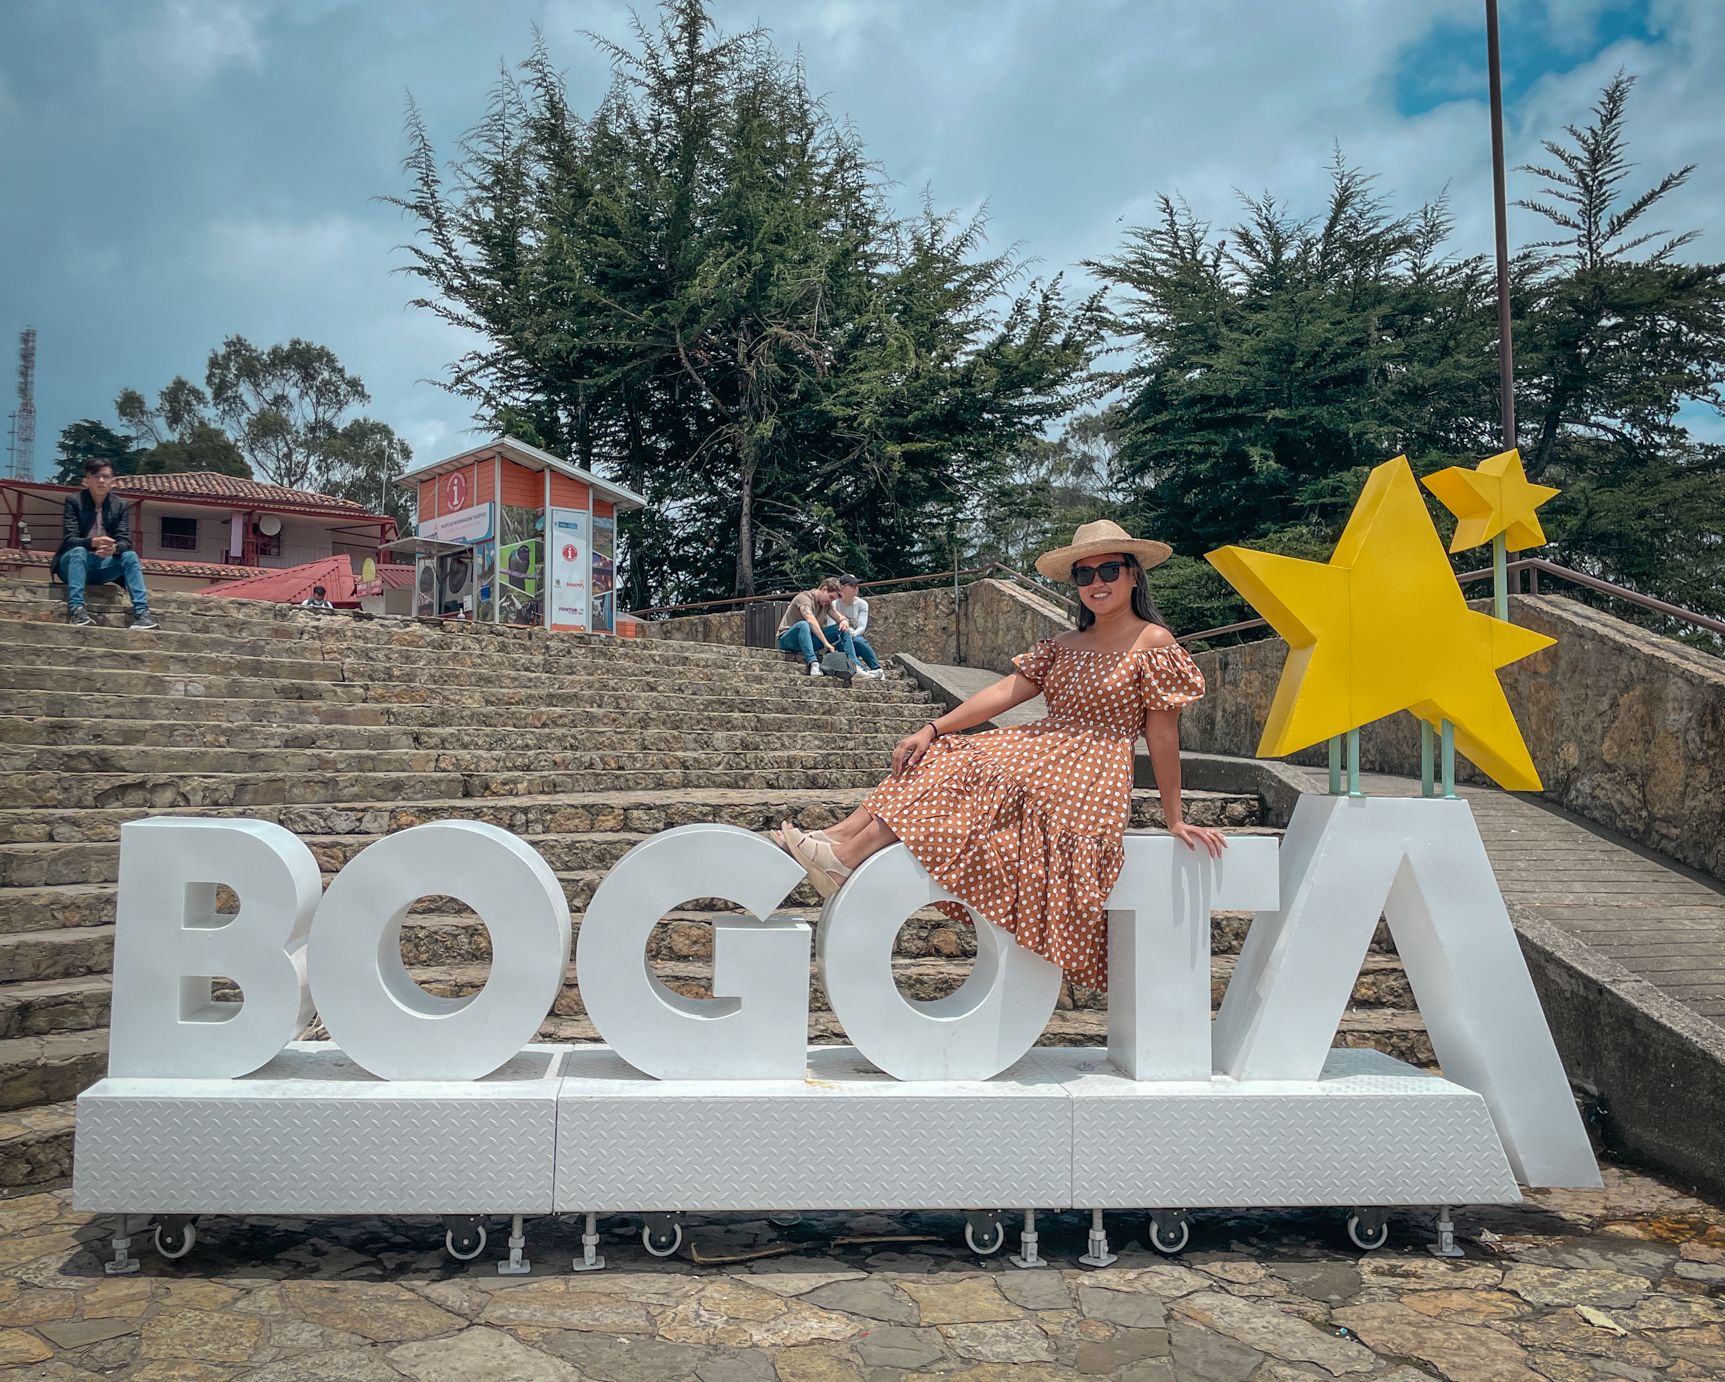 Bogota Travel Guide | What to See, Do and Eat